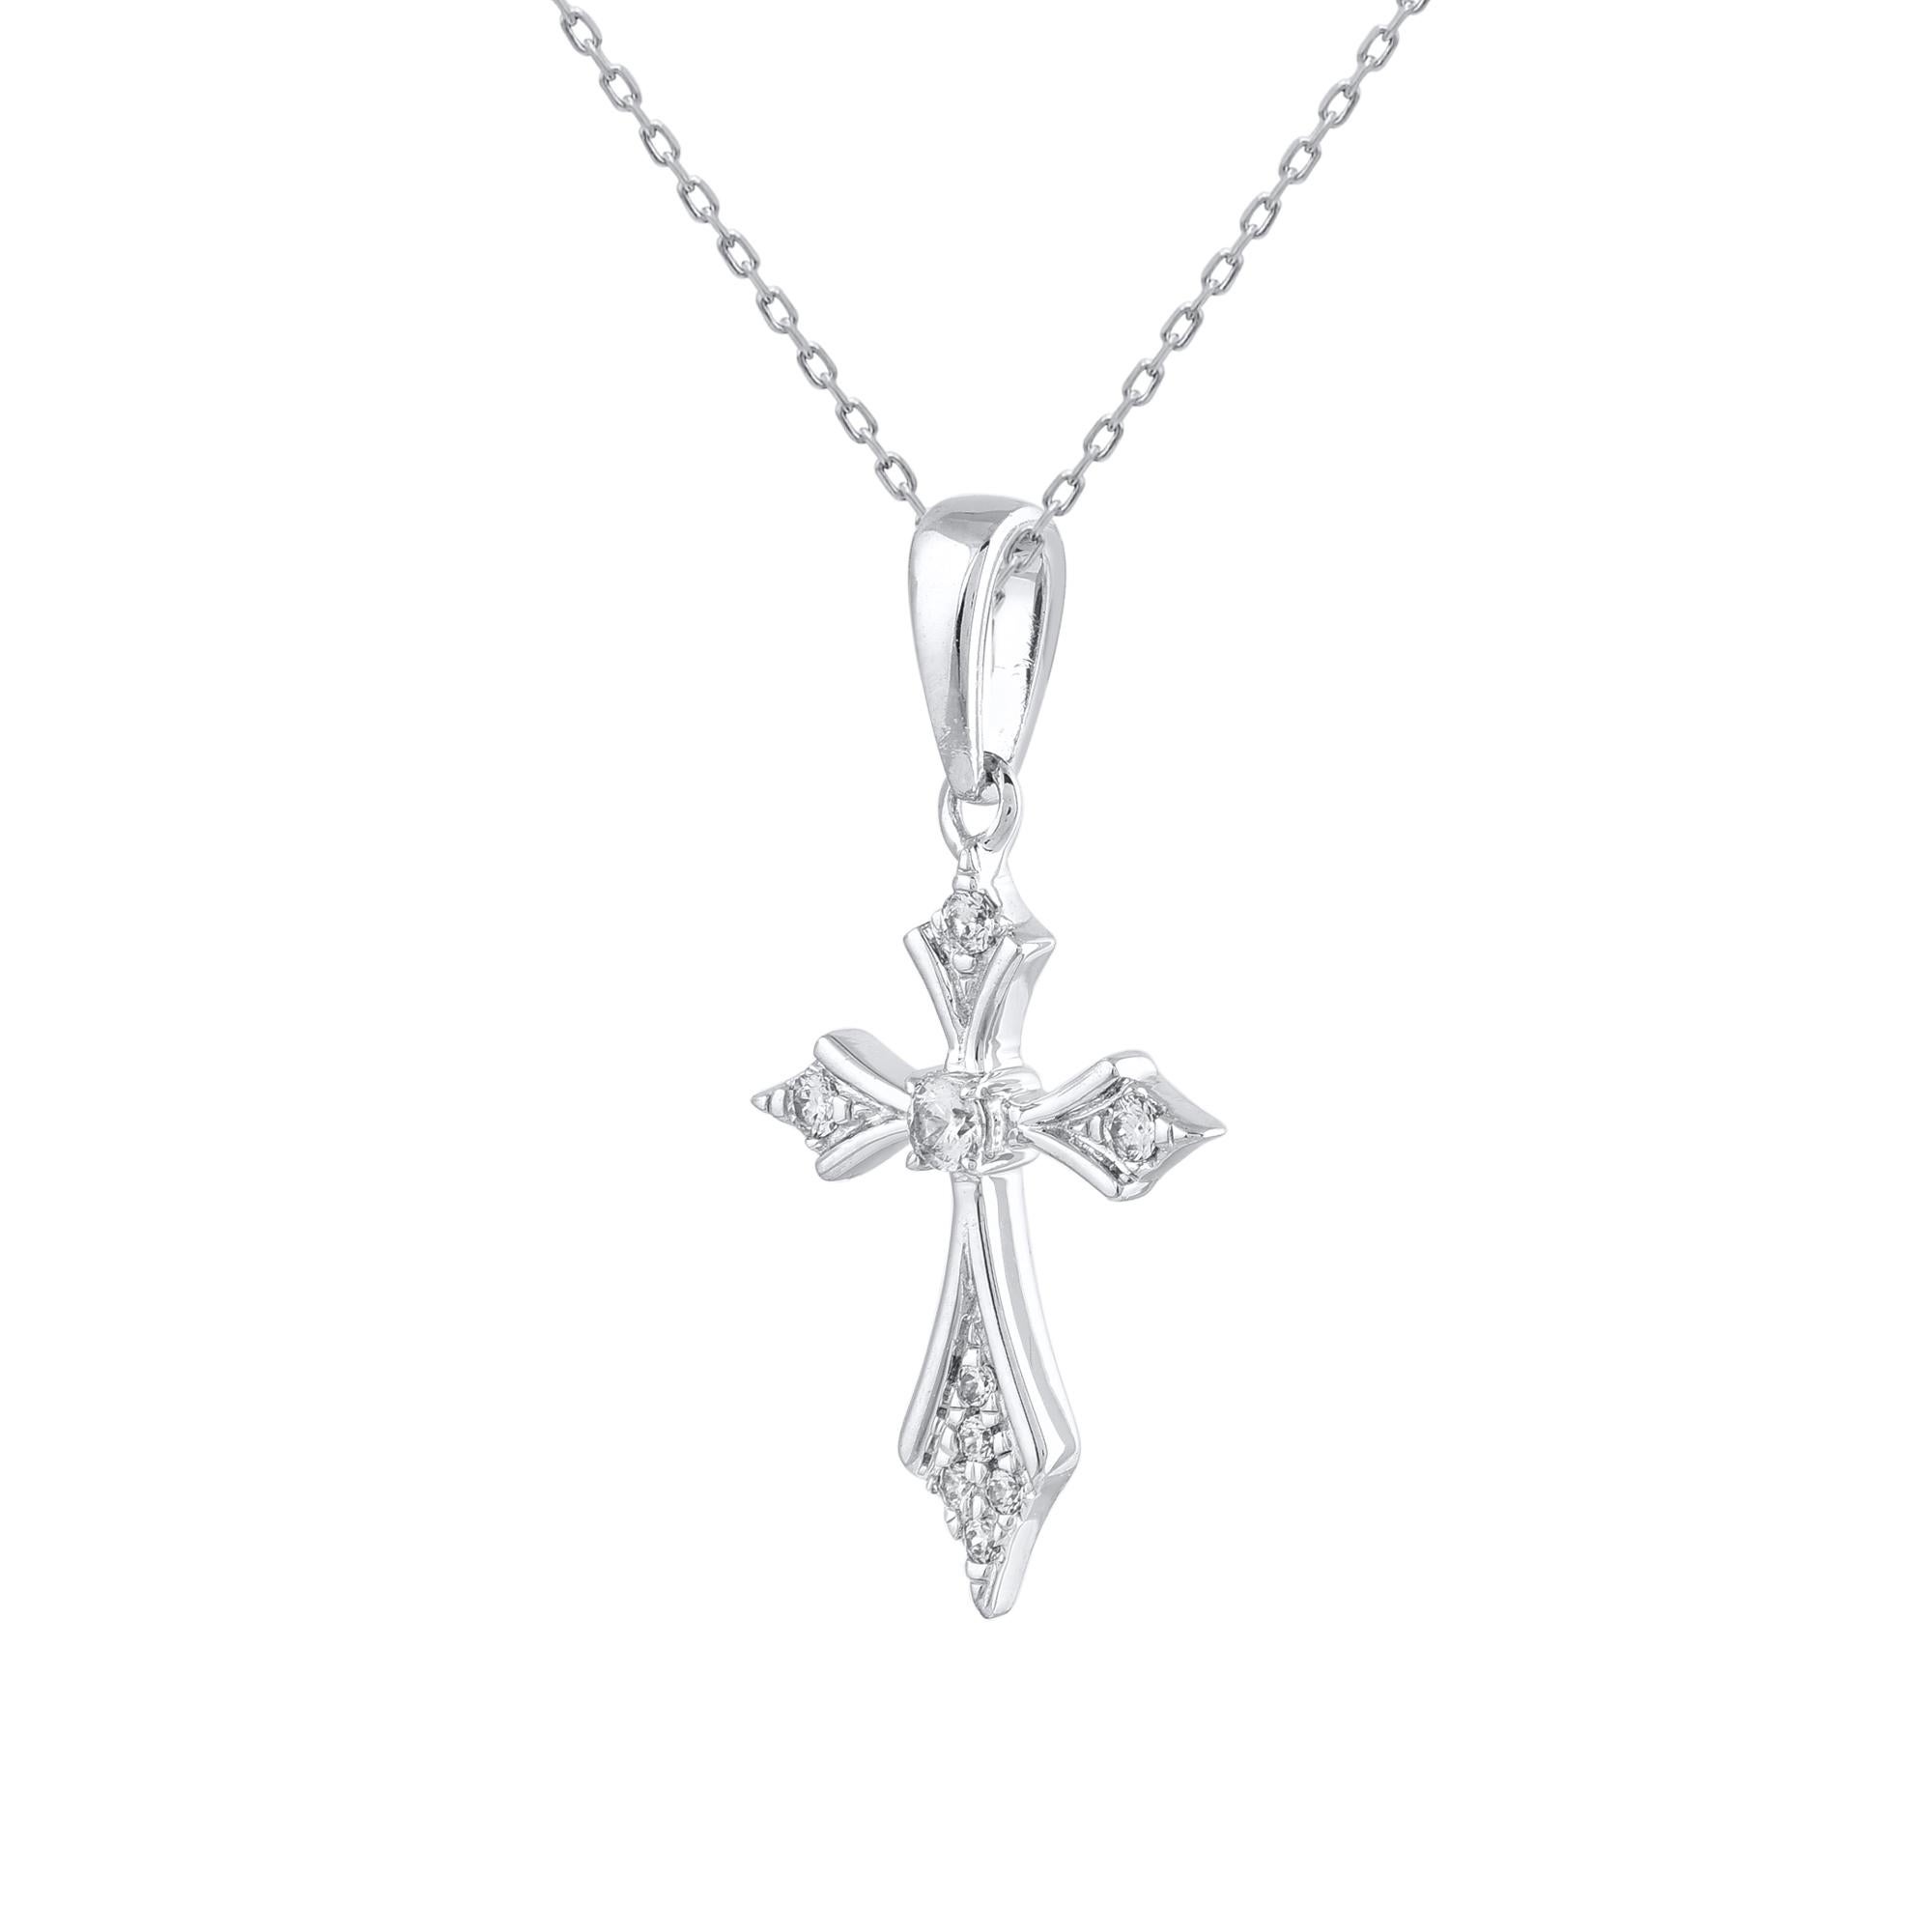 The traditional cross pendant has been given an update with the emphasis on style. Beautifully crafted by our inhouse experts in 14 karat white gold and embellished with 9 single cut & brilliant cut round diamond in prong setting. The total diamond